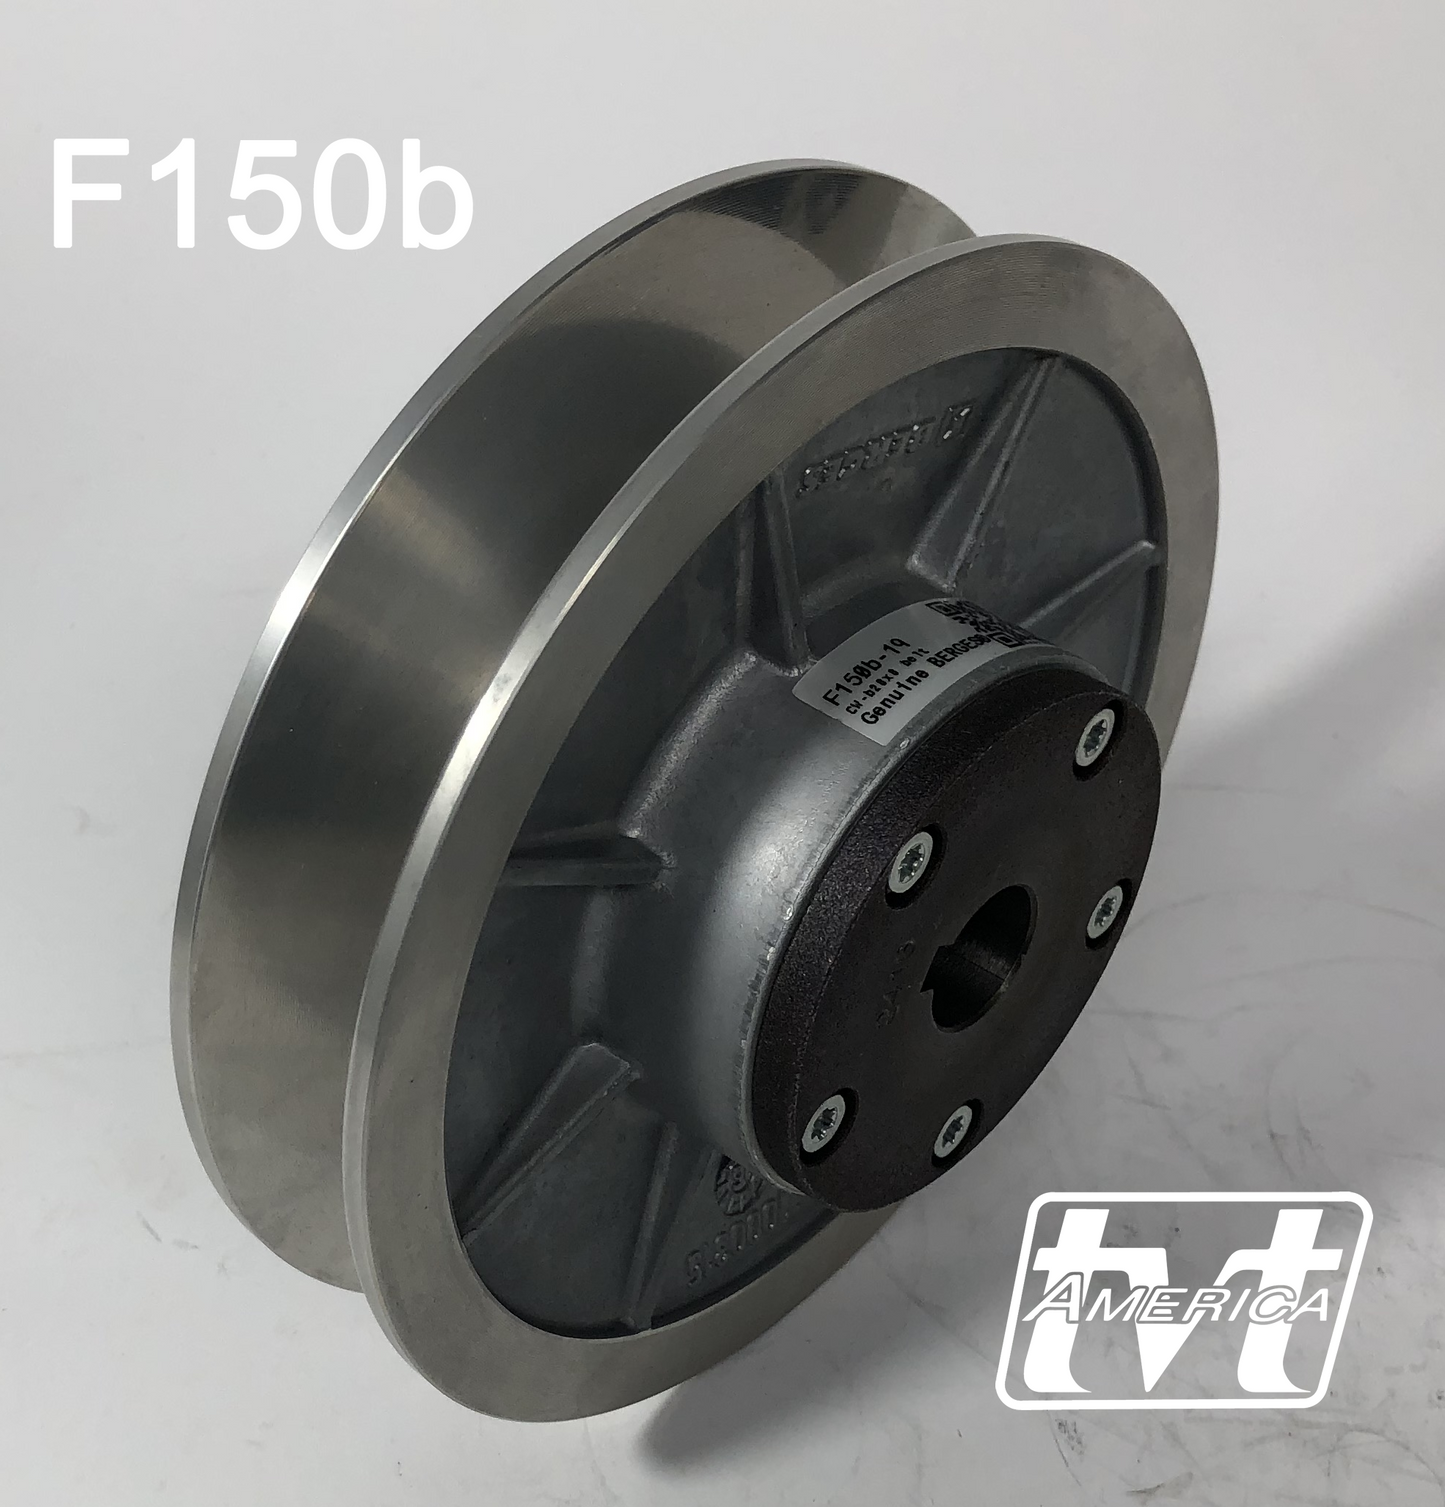 Berges® F150b Tension Pulley